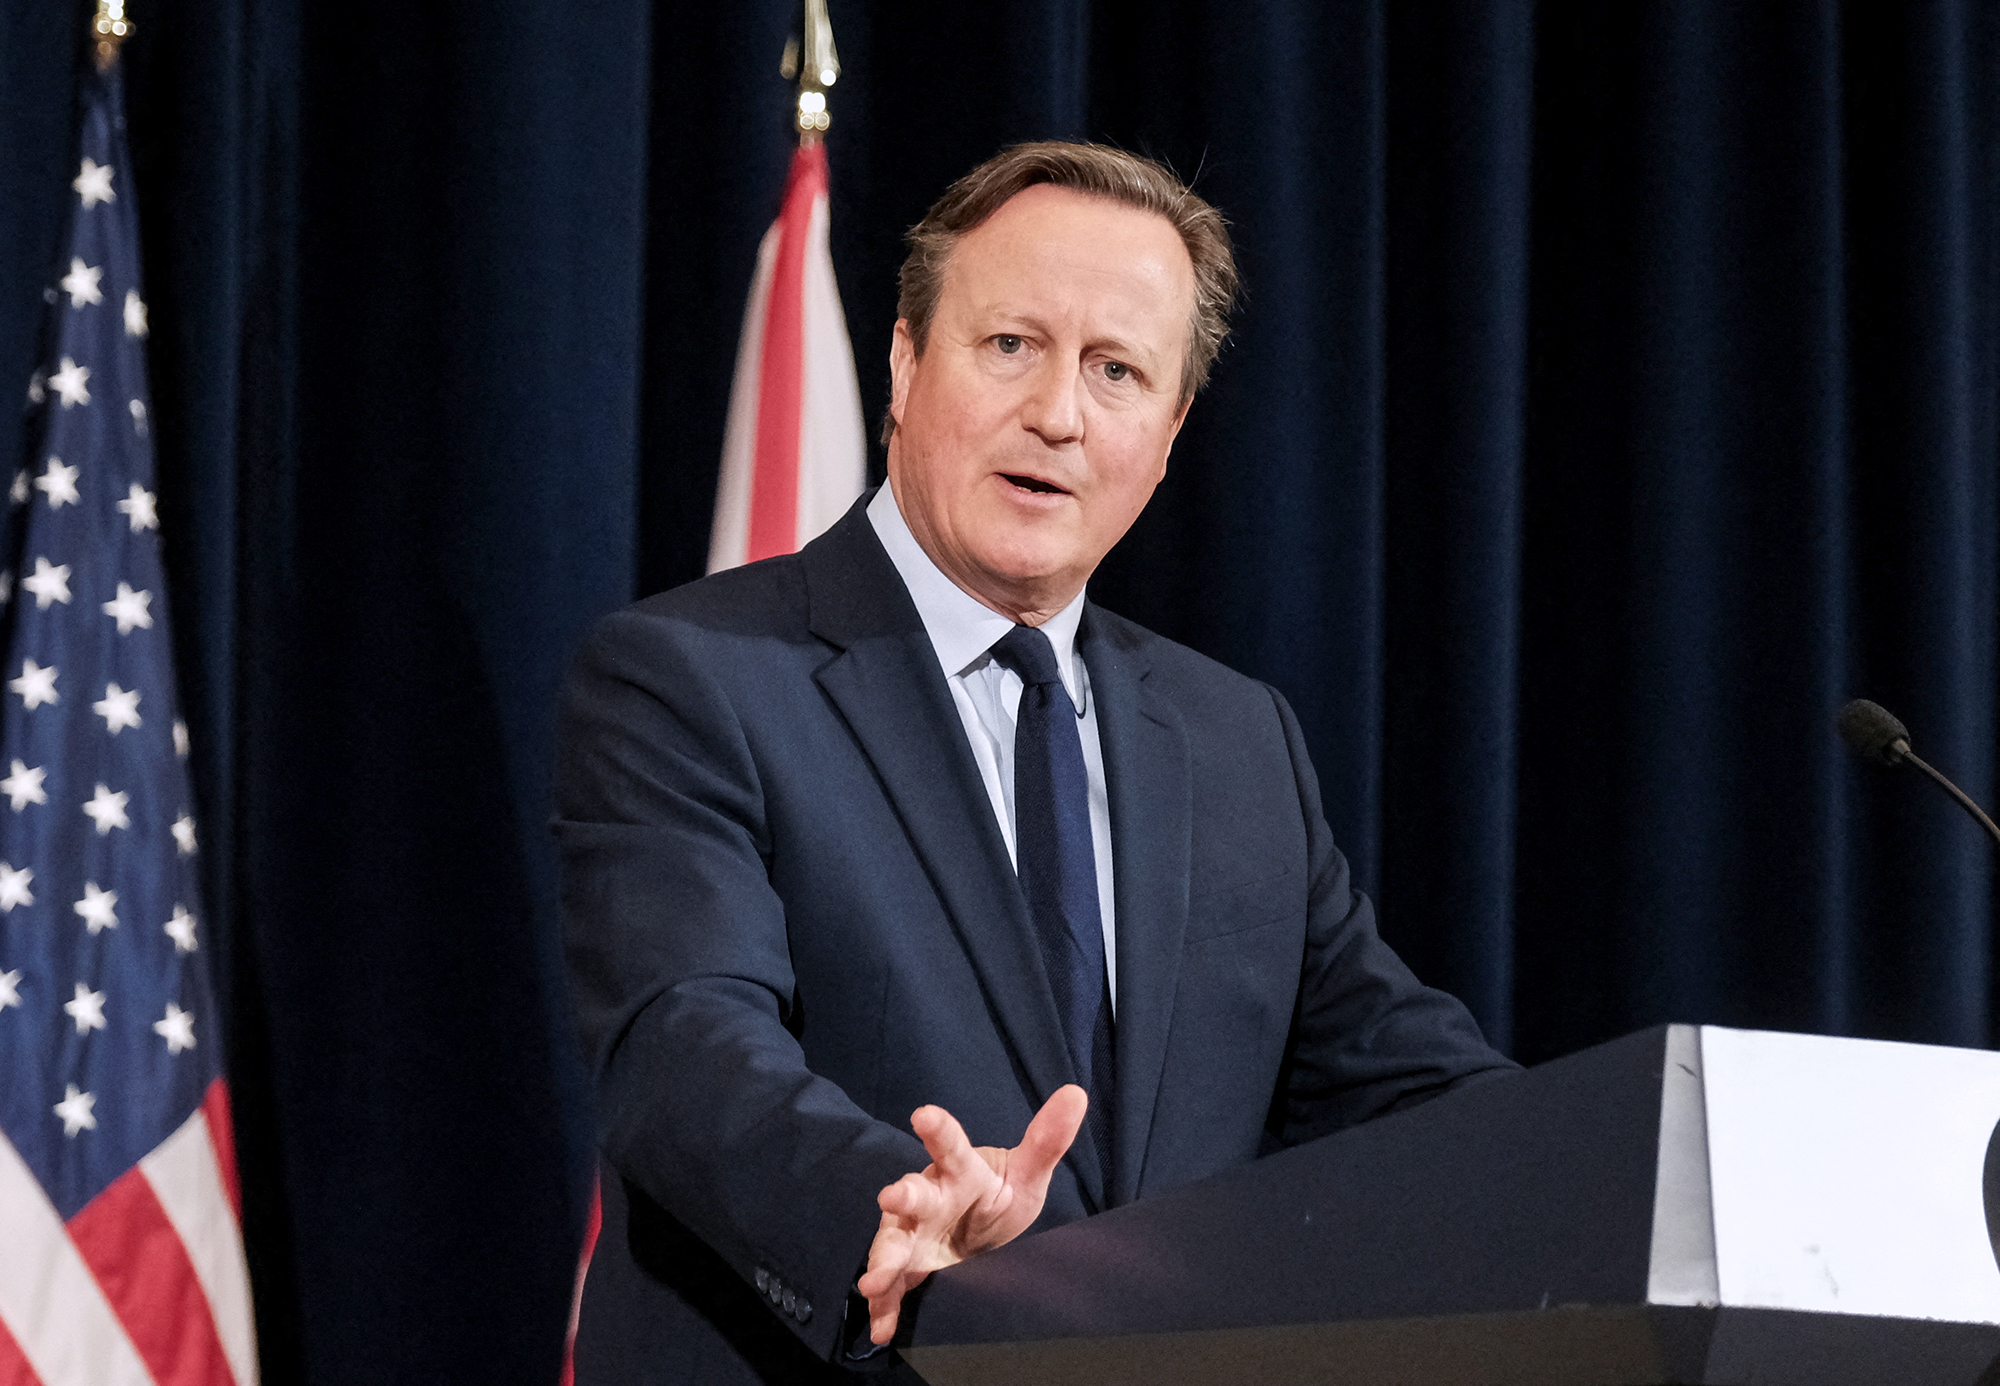 British Foreign Secretary David Cameron holds a joint press conference with U.S. Secretary of State Antony Blinken at the State Department in Washington, D.C., on April 9.